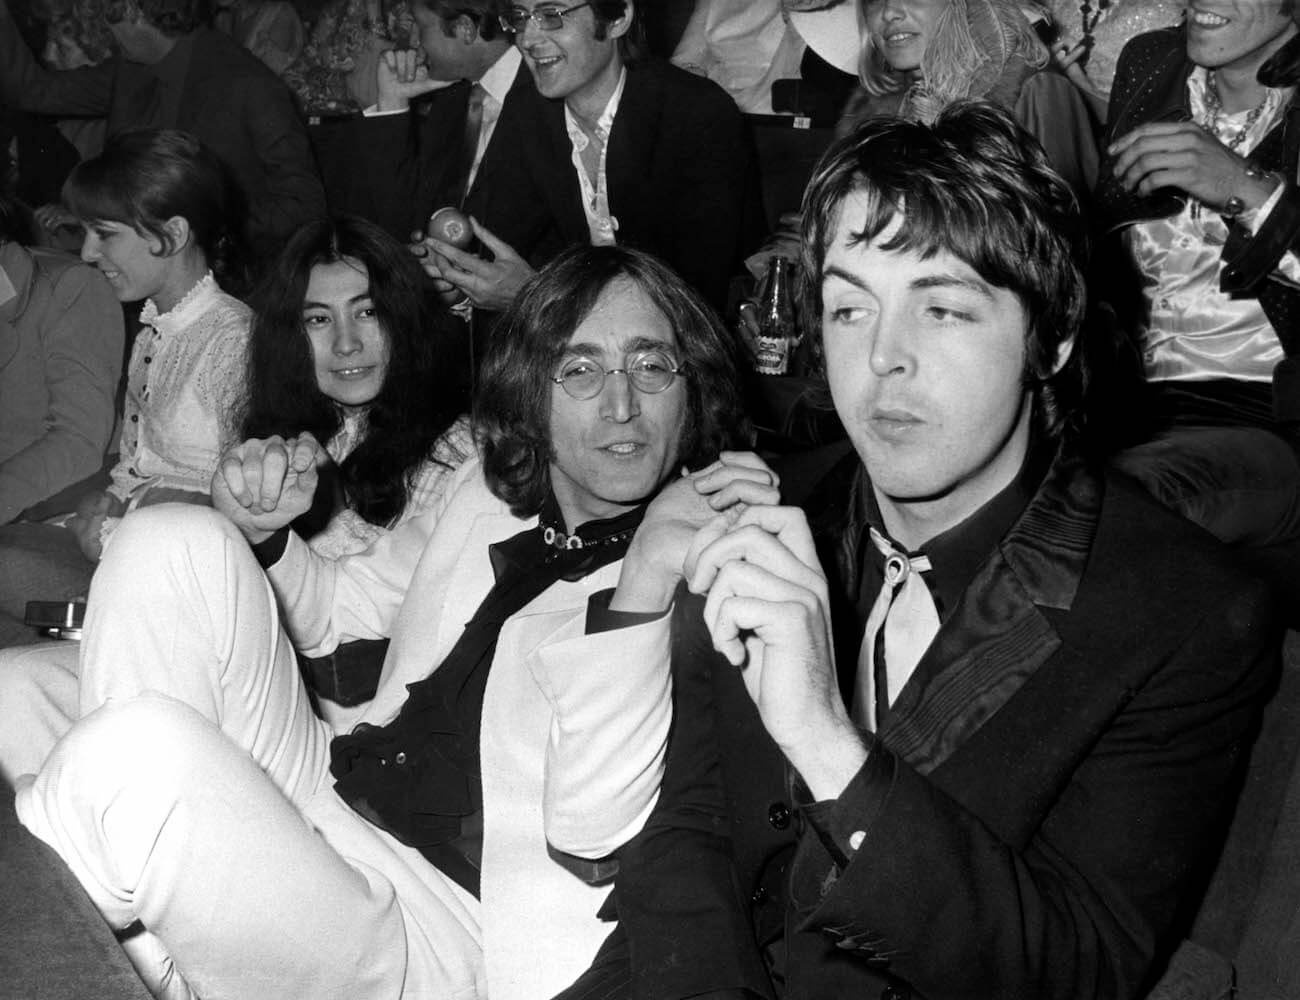 Paul McCartney, John Lennon, and Yoko Ono at the premiere of The Beatles' 'Yellow Submarine' in 1968.